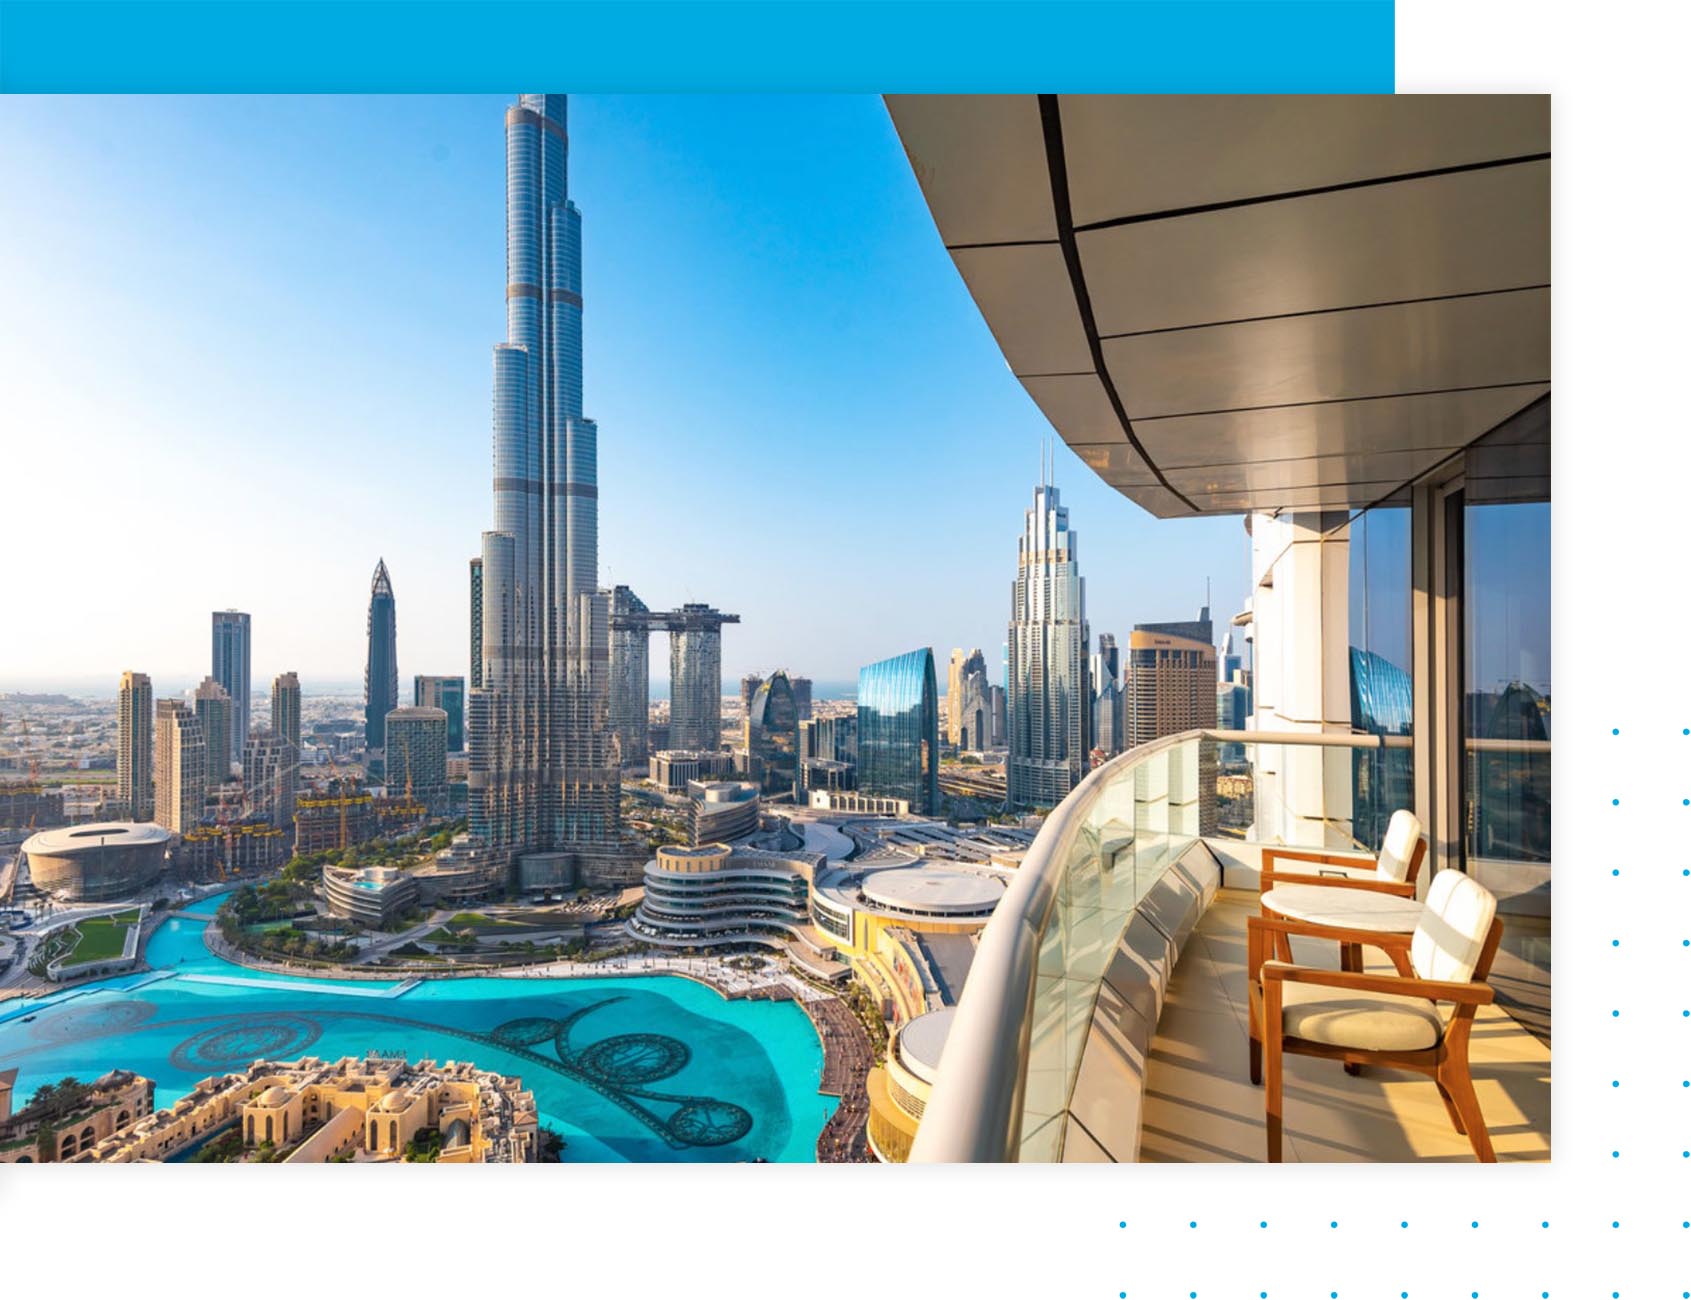 The Most Popular Types of Real Estate in Dubai